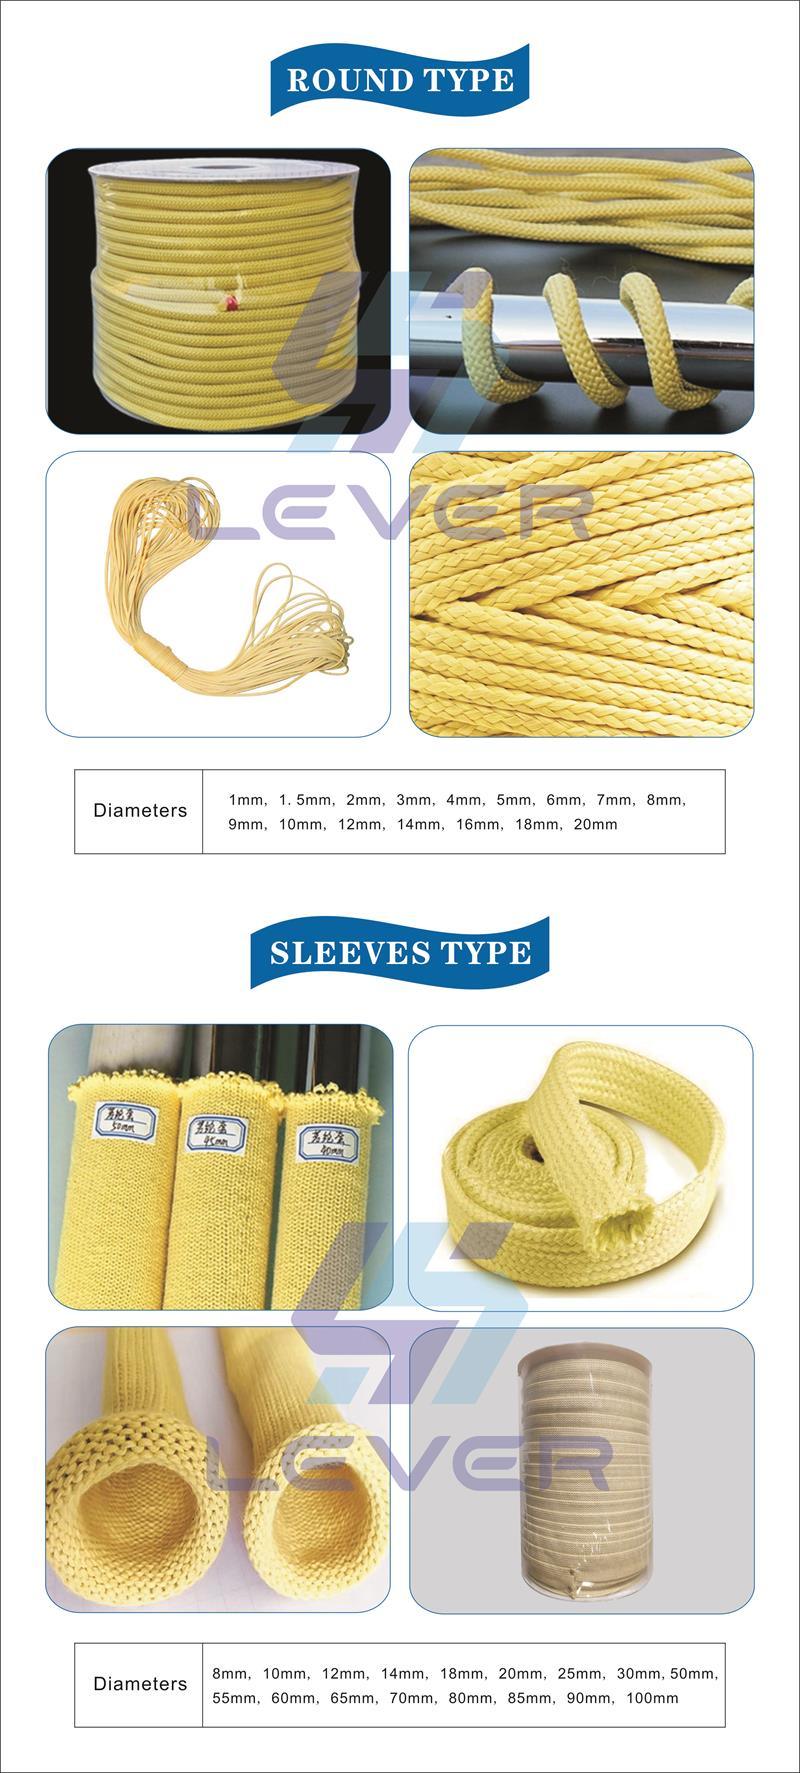 Kevlar Oven Roller Tapes and Ropes, Woven Kevlar Oven Roller Tapes and Ropes, Braided Round Rope, Tuff Temp Tapes and Ropes